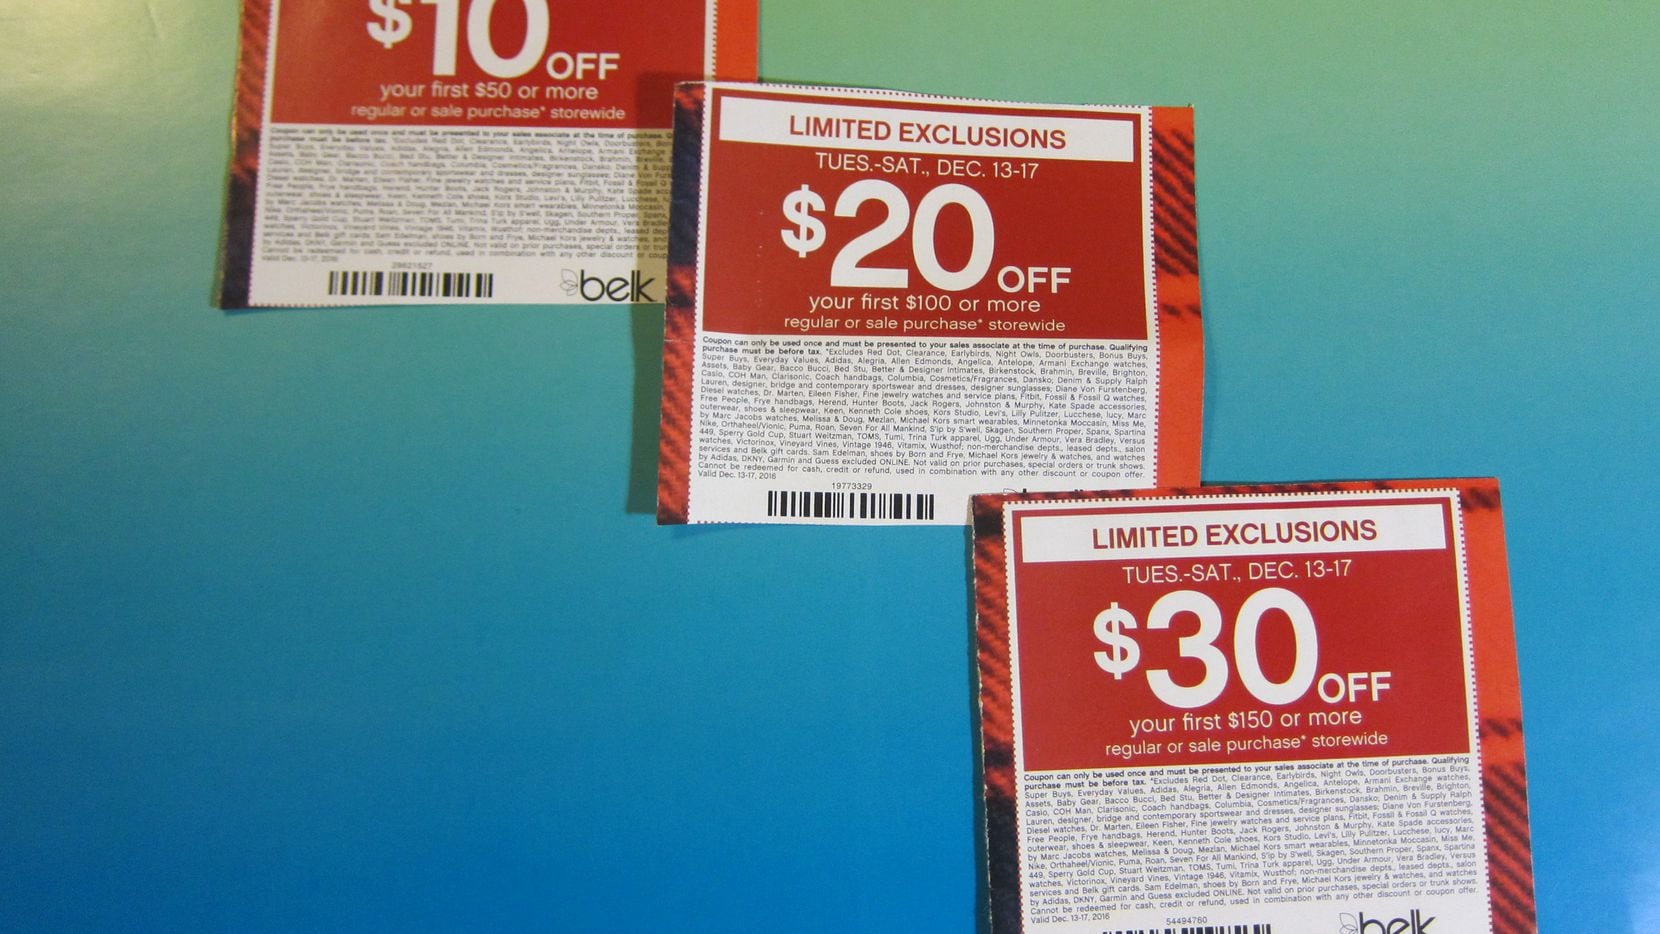 Coupon Exclusions Latest Way Stores Fool Retail Shoppers